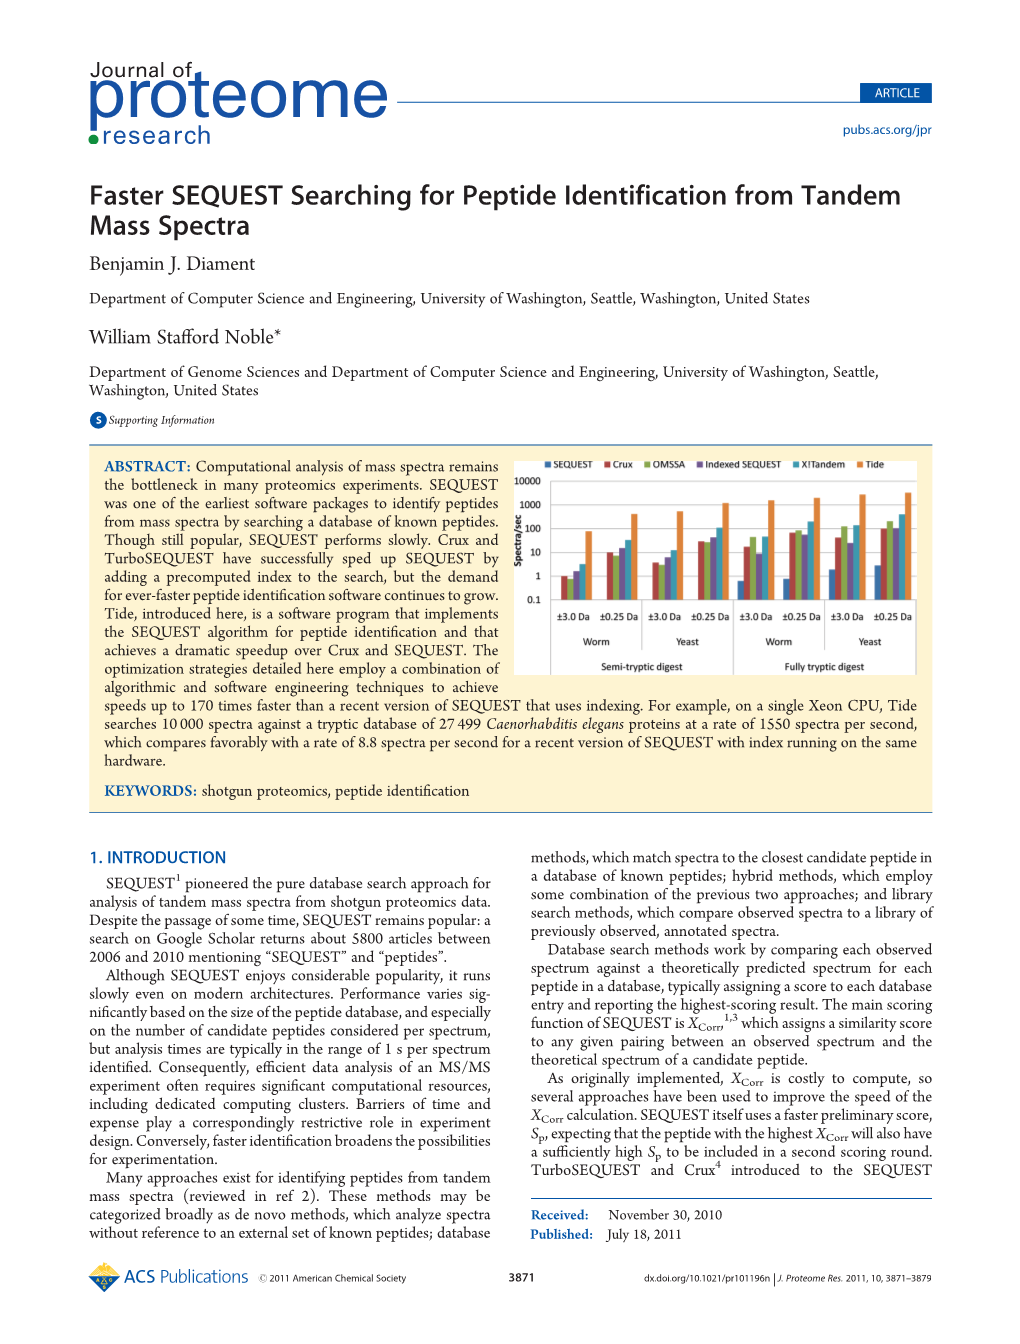 Faster SEQUEST Searching for Peptide Identification from Tandem Mass Spectra Benjamin J